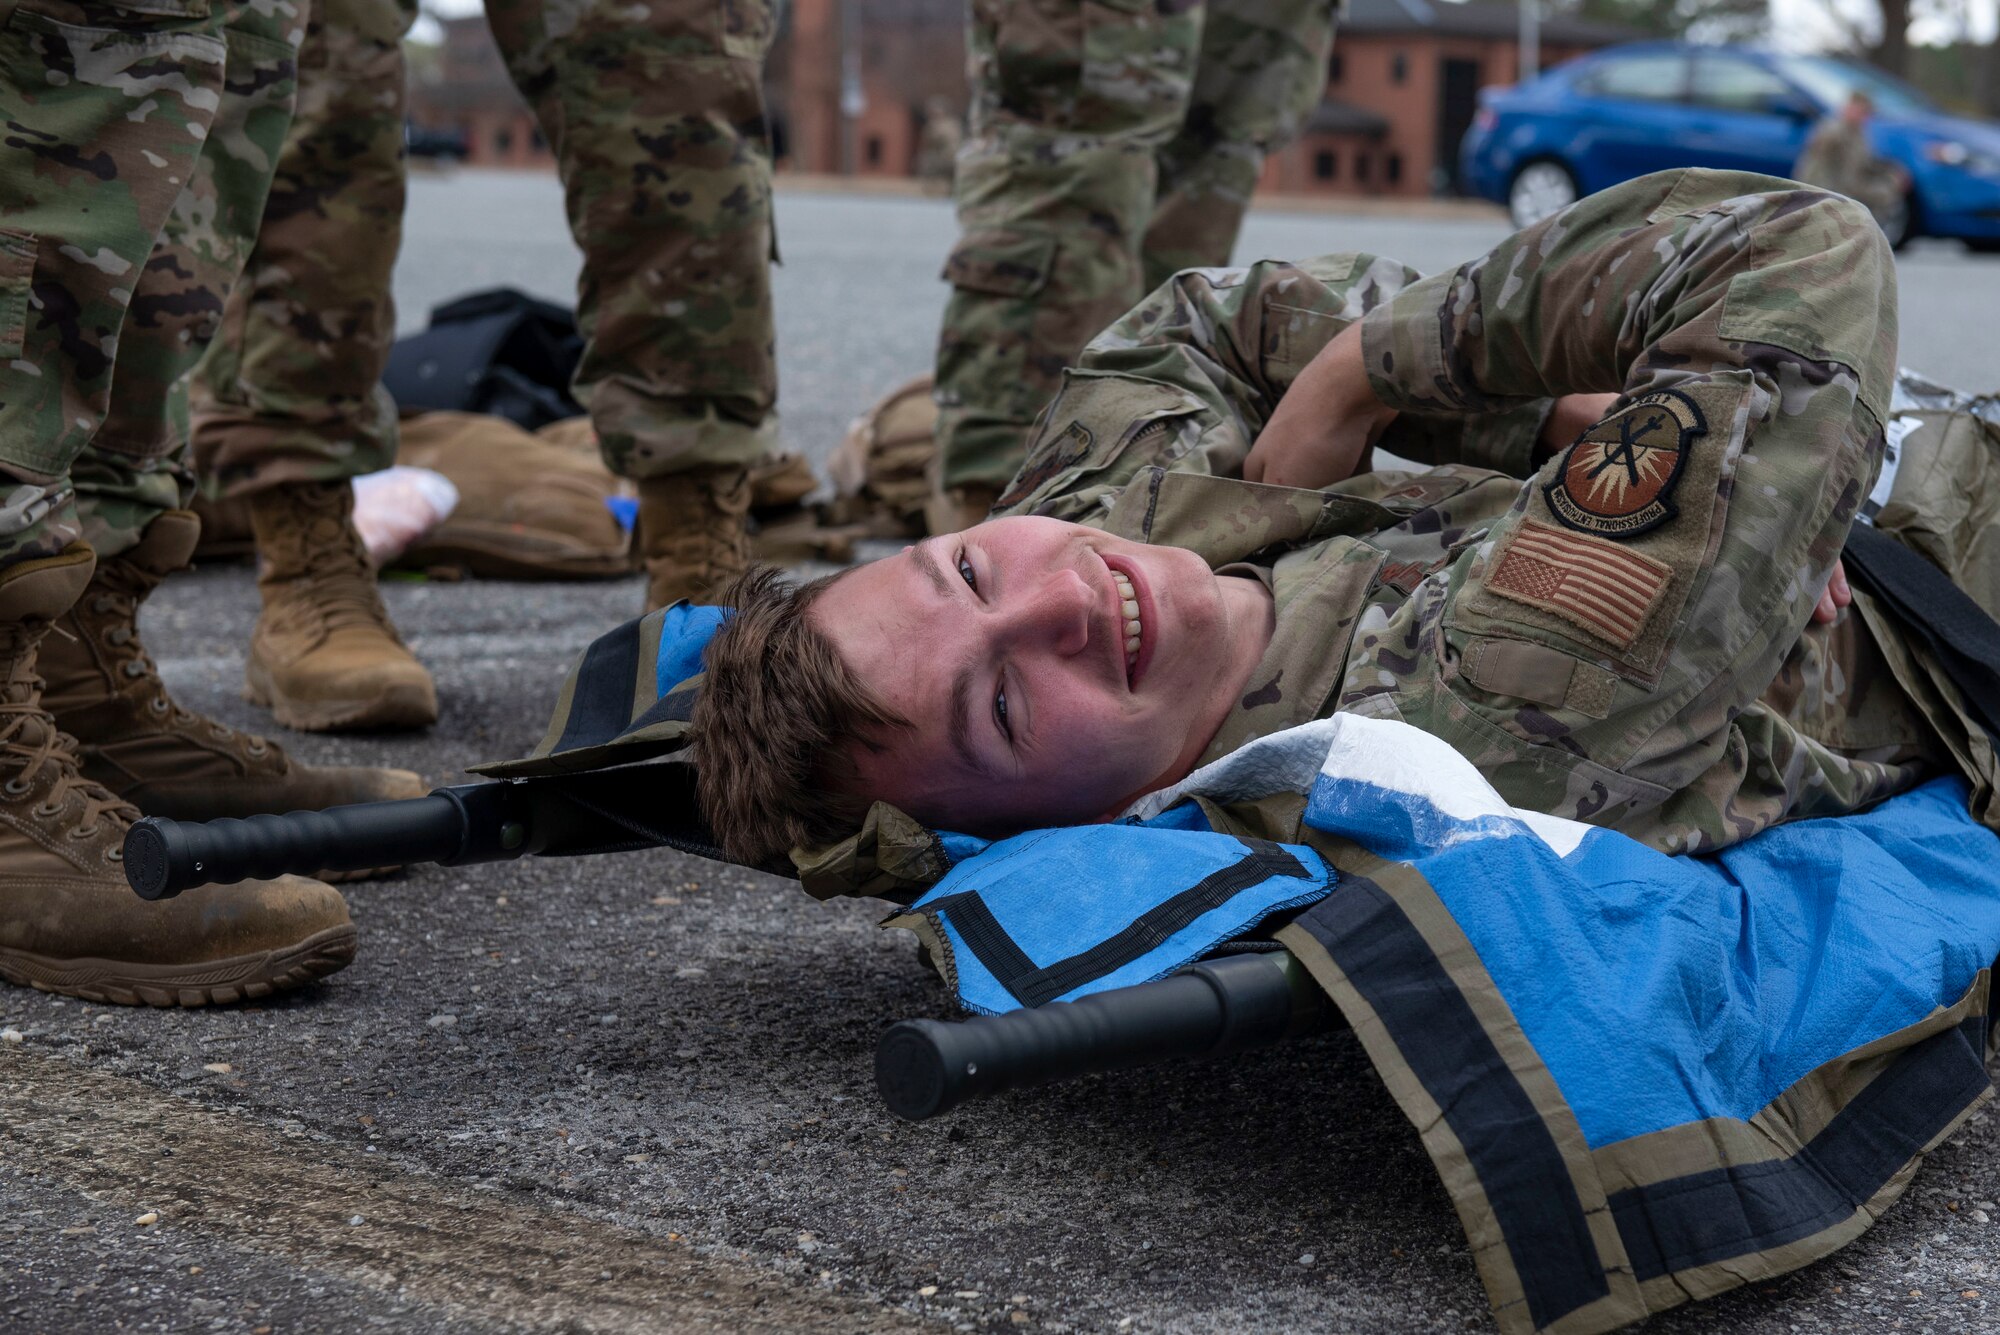 Senior Airman Matthews, 4th Equipment Maintenance Squadron repair and reclamation journeyman, simulates being injured during tactical casualty combat care training at Seymour Johnson Air Force Base, Feb. 18, 2022. TCCC training prepares for real-world scenarios. (U.S. Air Force photo by Airman 1st Class Sabrina Fuller)